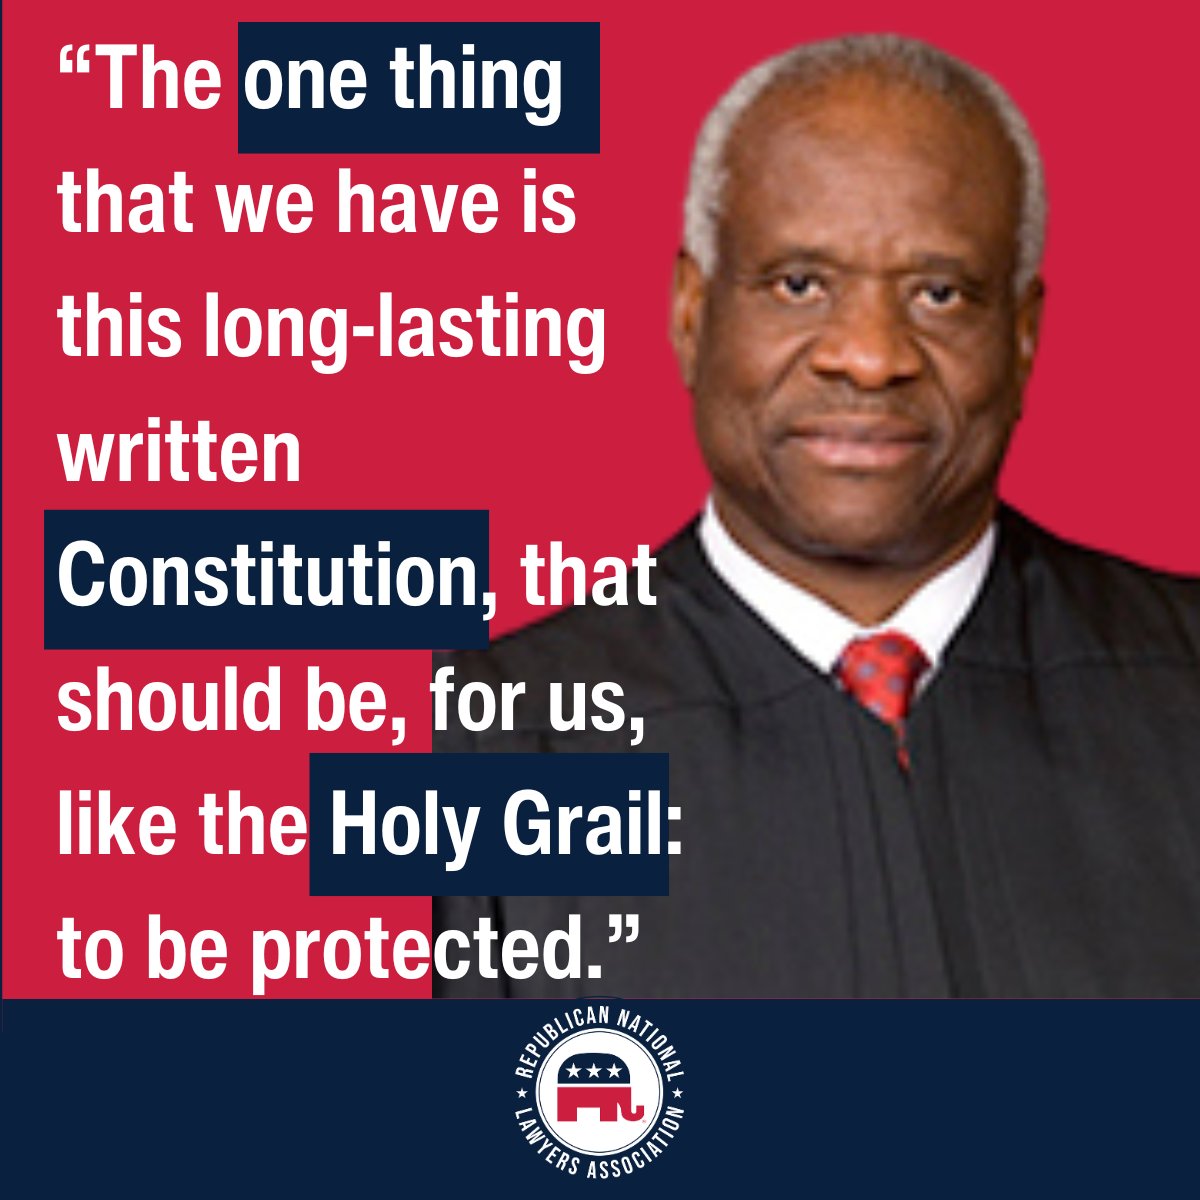 Justice Clarence Thomas is now the 10th longest serving Supreme Court Justice. As @MarkPaoletta reminds us, Thomas is a national treasure.